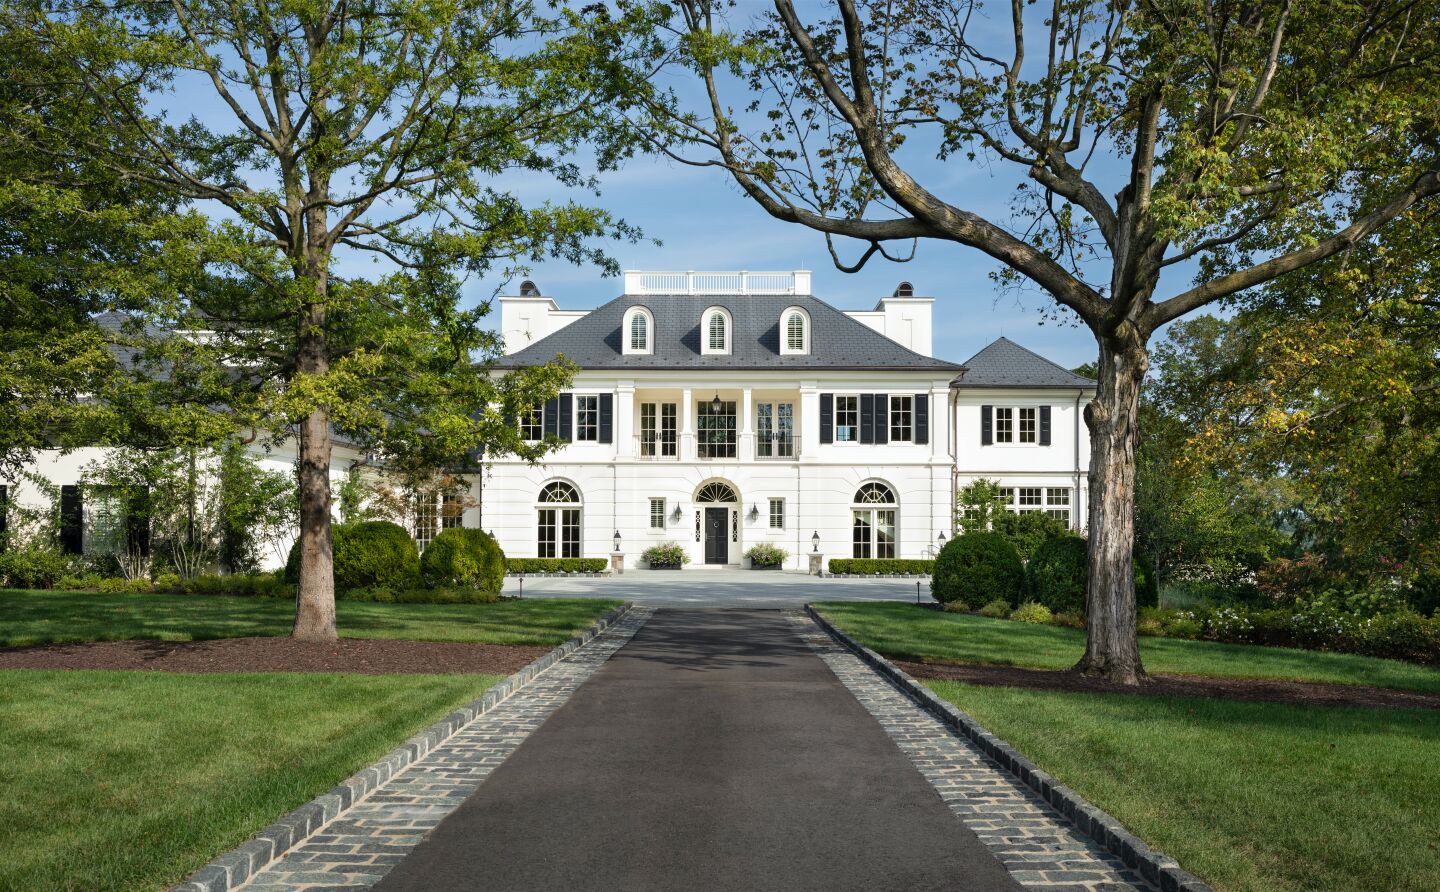 The 16.5-acre estate on the Potomac River centers on a 16,000-square-foot Federal-style mansion built in 2018.